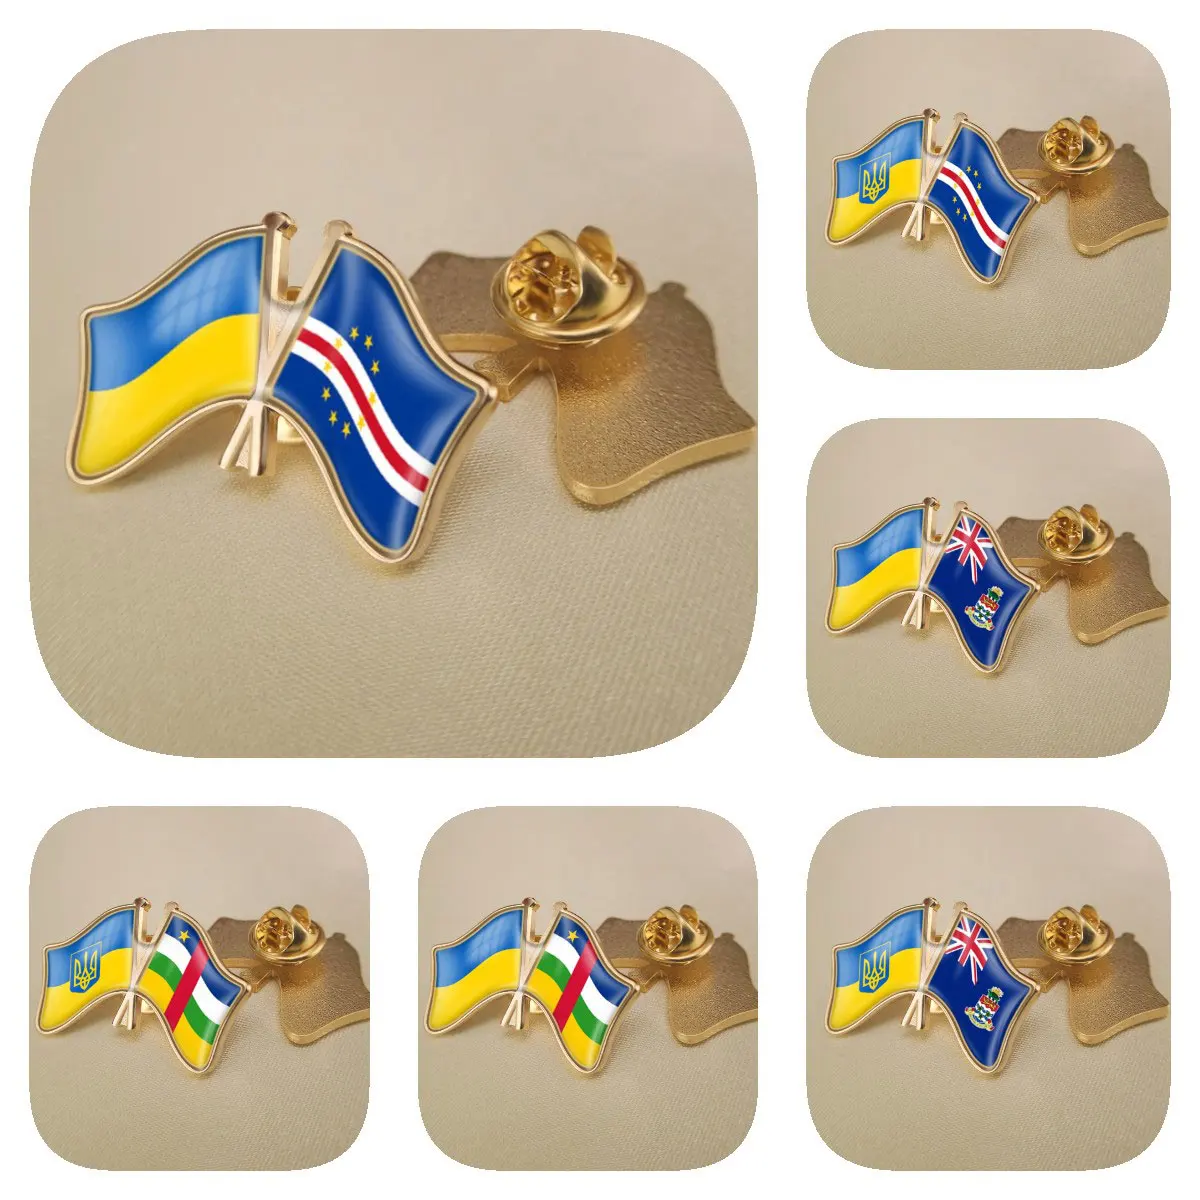 

Ukraine and Cape Verde Cayman Islands Central African Republic Double Crossed Friendship Flags Brooches Lapel Pins Bradges